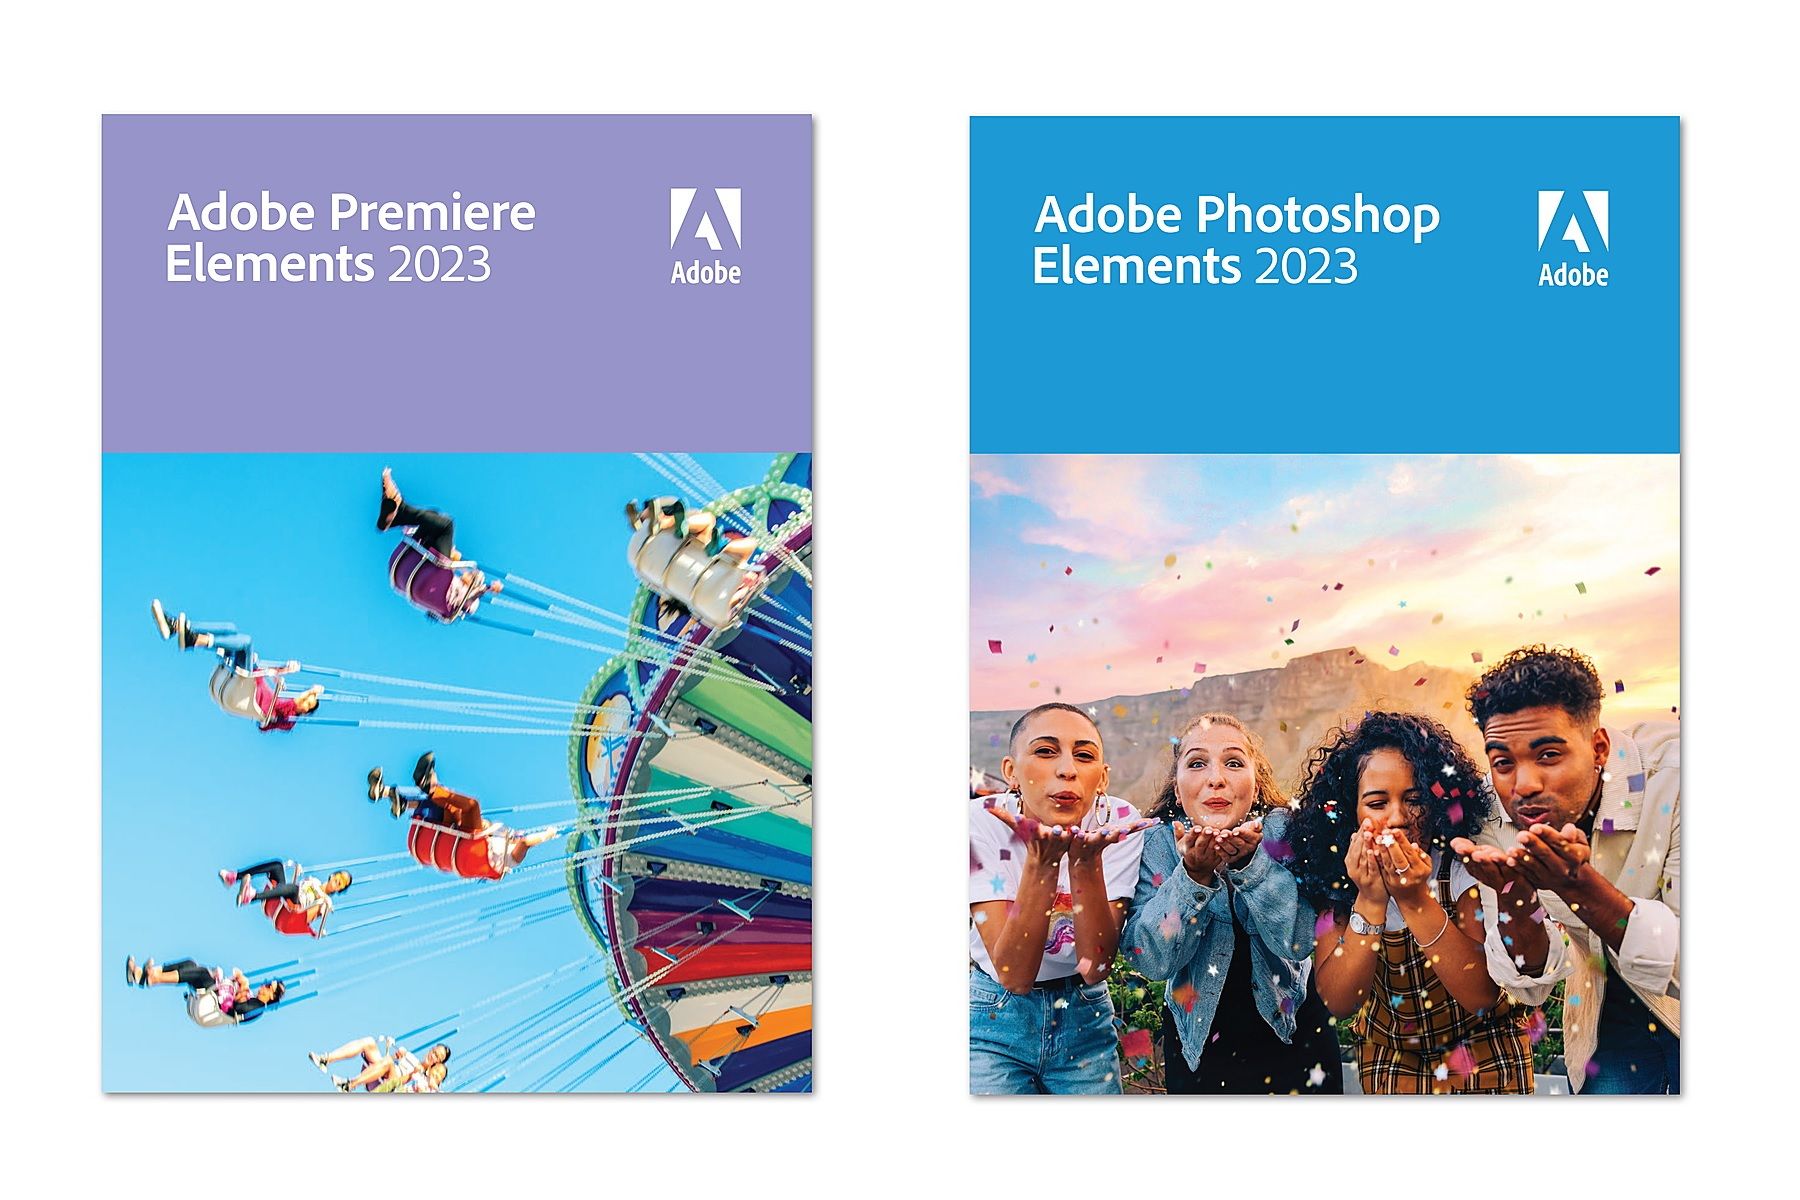 Product box covers for Adobe Premiere Elements and Photoshop Elements 2023, showing two different pictures with the logo and branding for each app above them